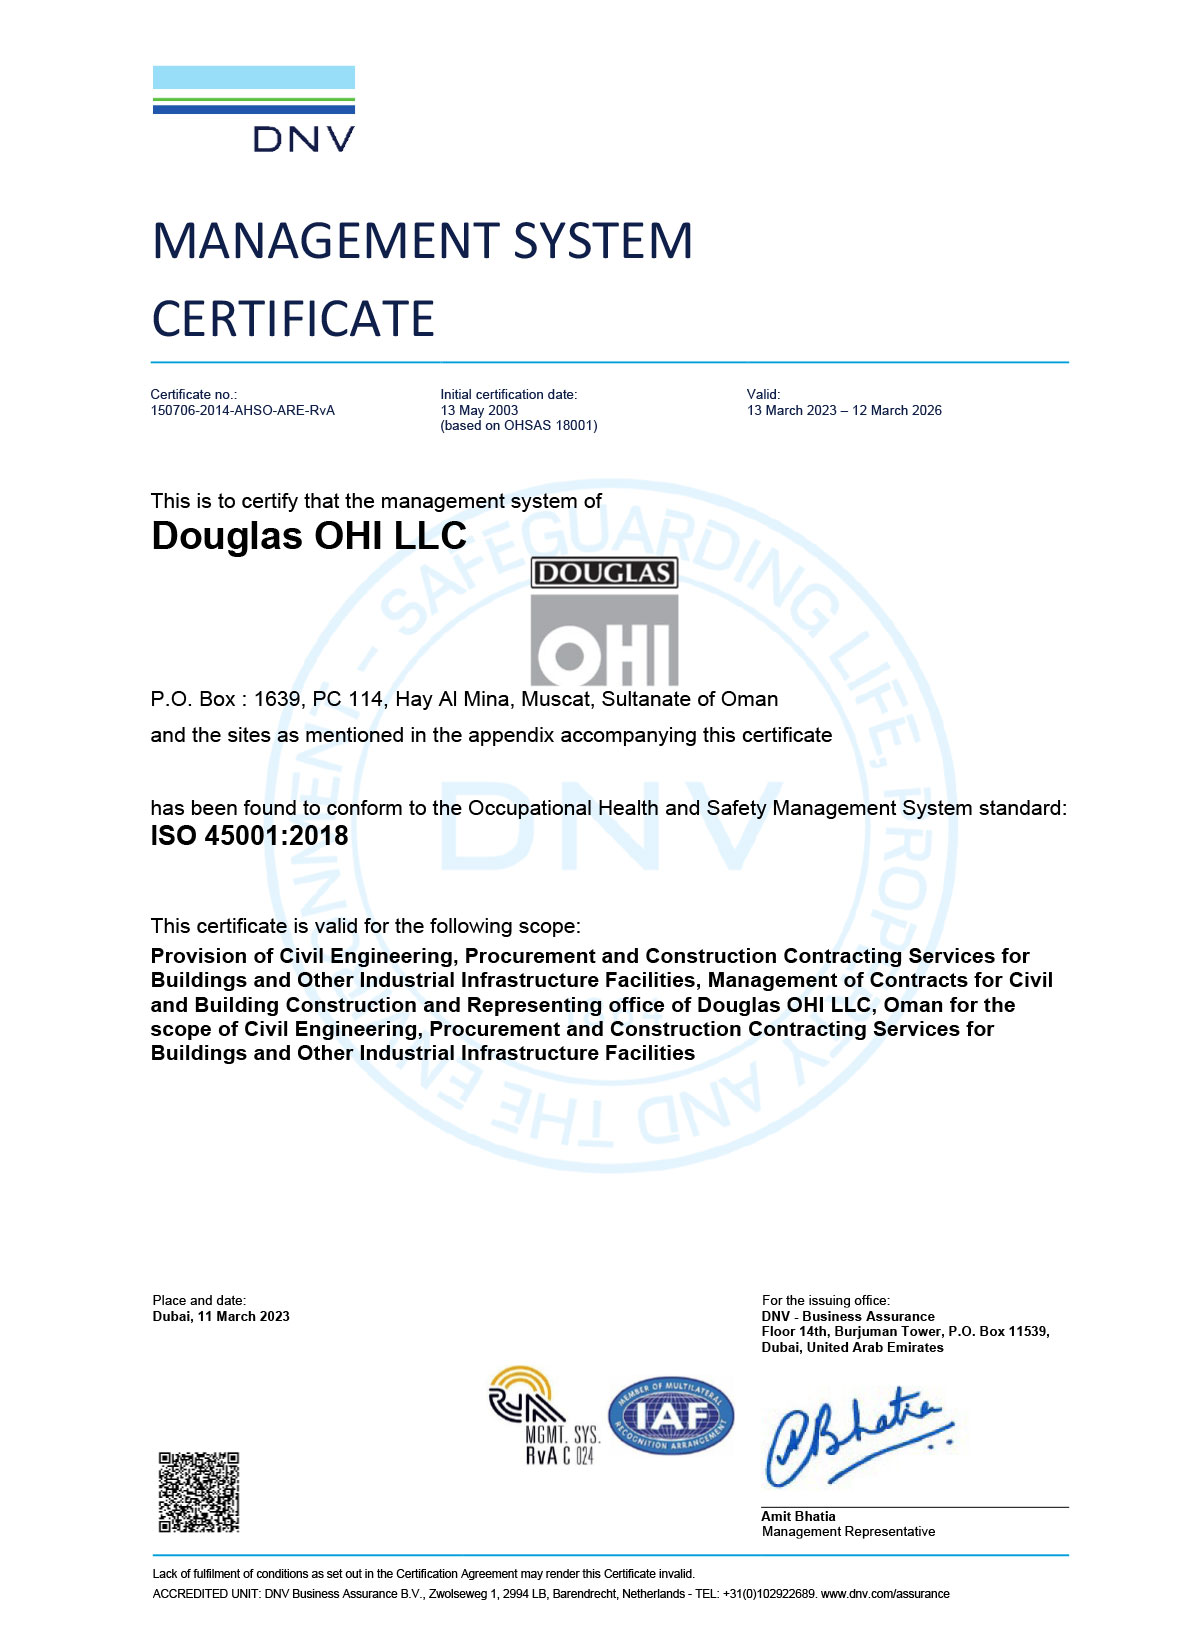 MANAGEMENT-SYSTEM-CERTIFICATE-2022